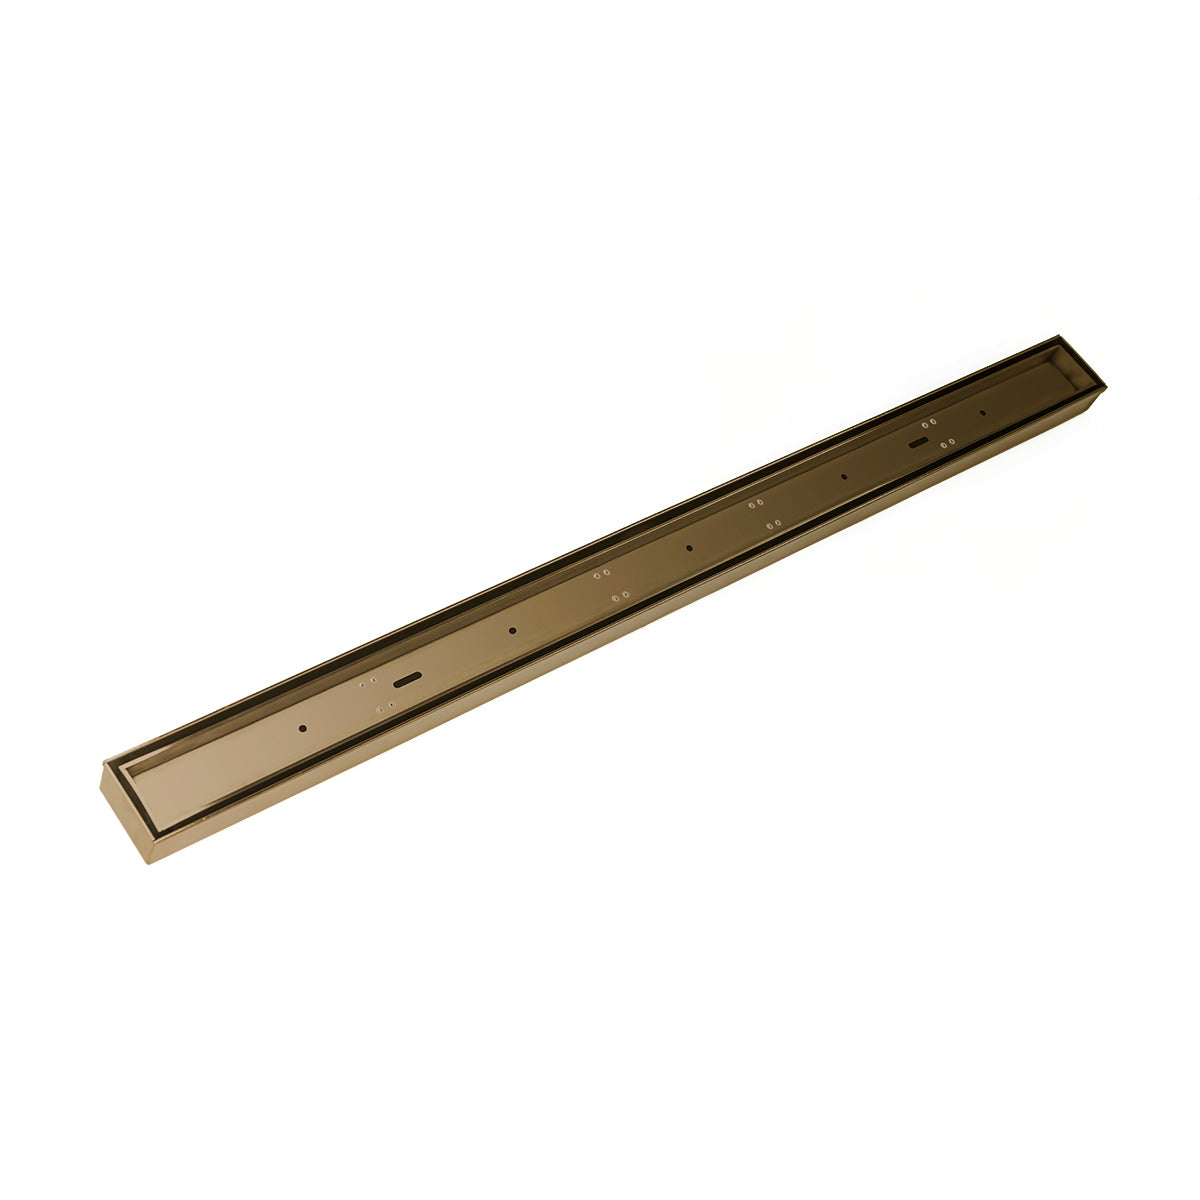 Infinity Drain 32" FX Low Profile Series Fixed Length Linear Drain Kit with Tile Insert Frame